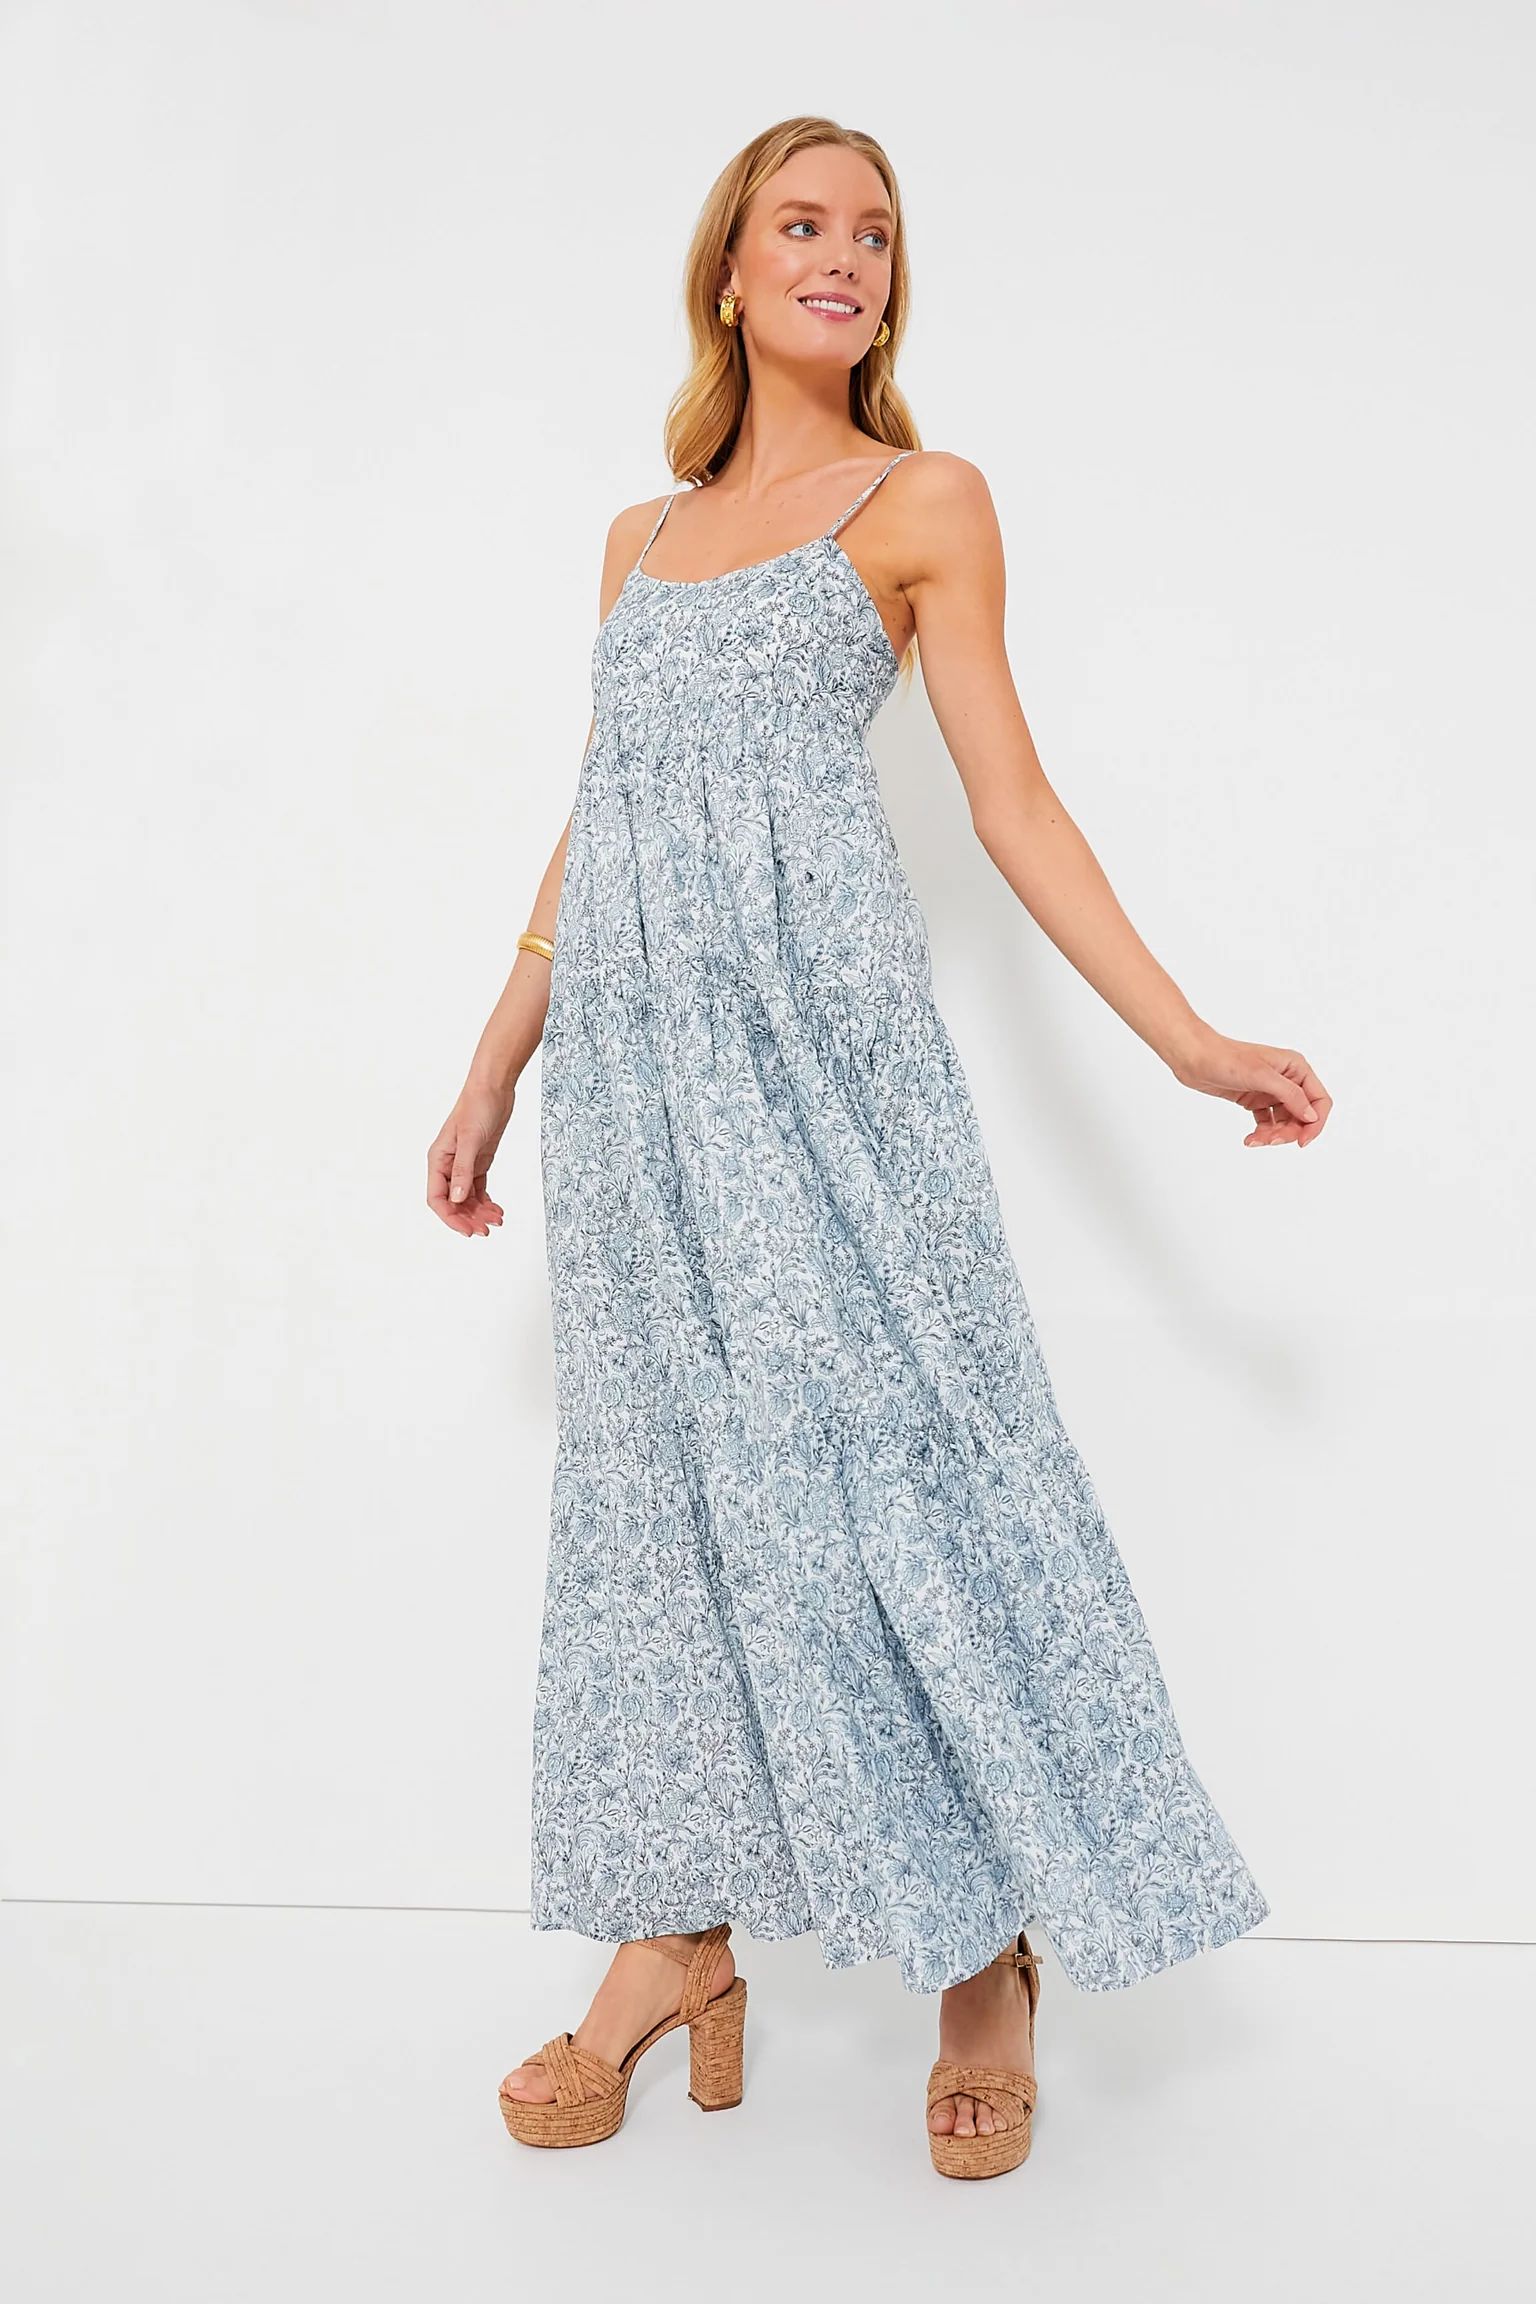 Blue and White Floral Tiered Teresa Maxi Dress | Tuckernuck (US)